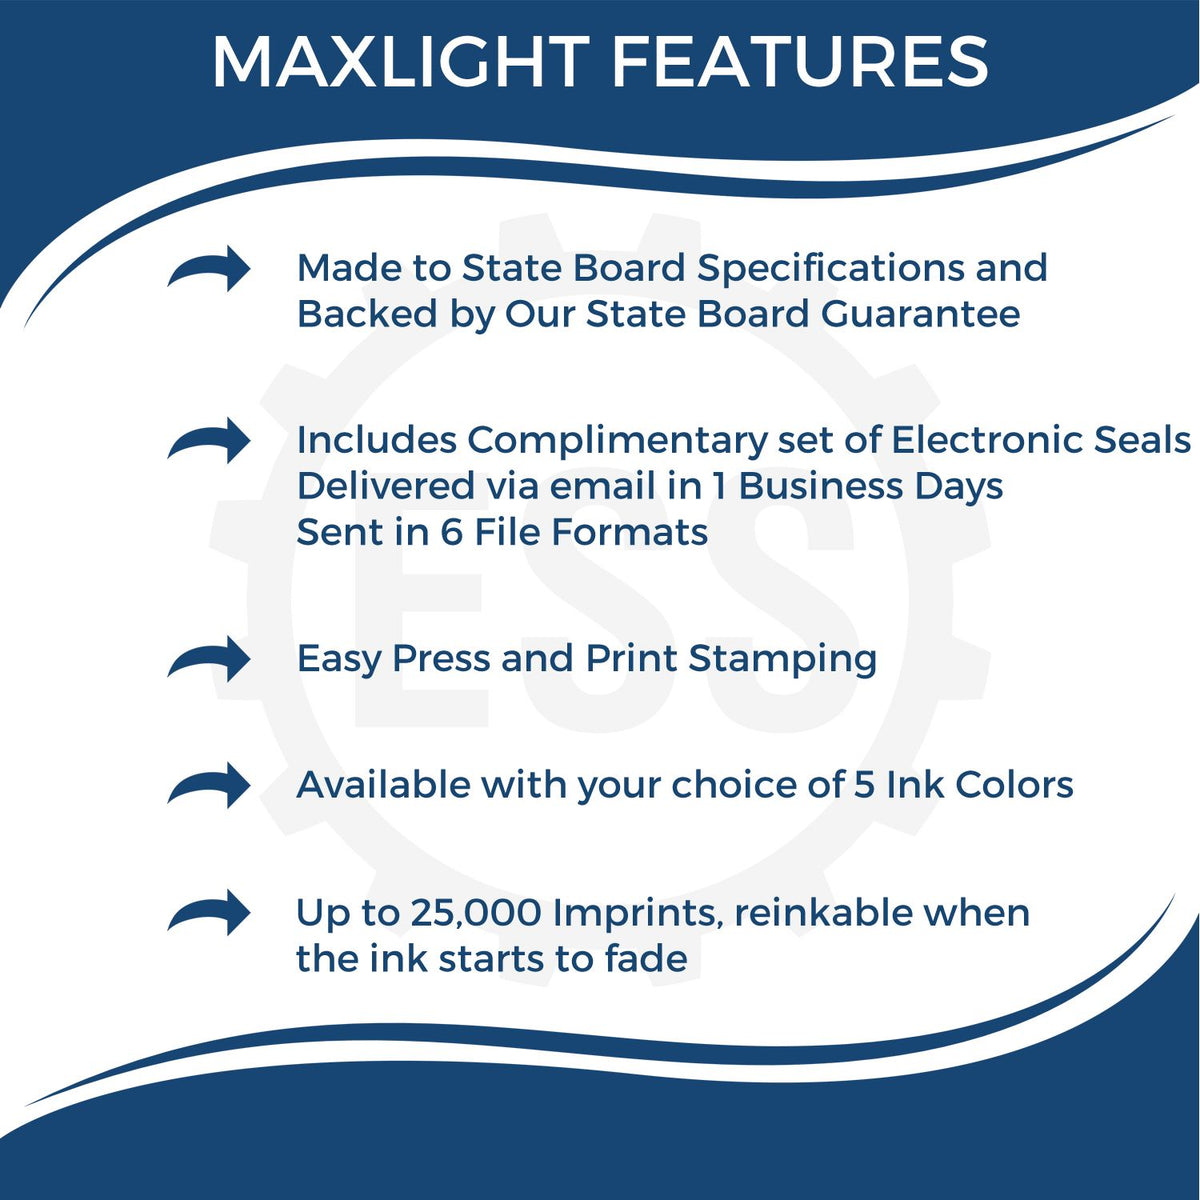 A picture of an infographic highlighting the selling points for the Premium MaxLight Pre-Inked Kansas Landscape Architectural Stamp